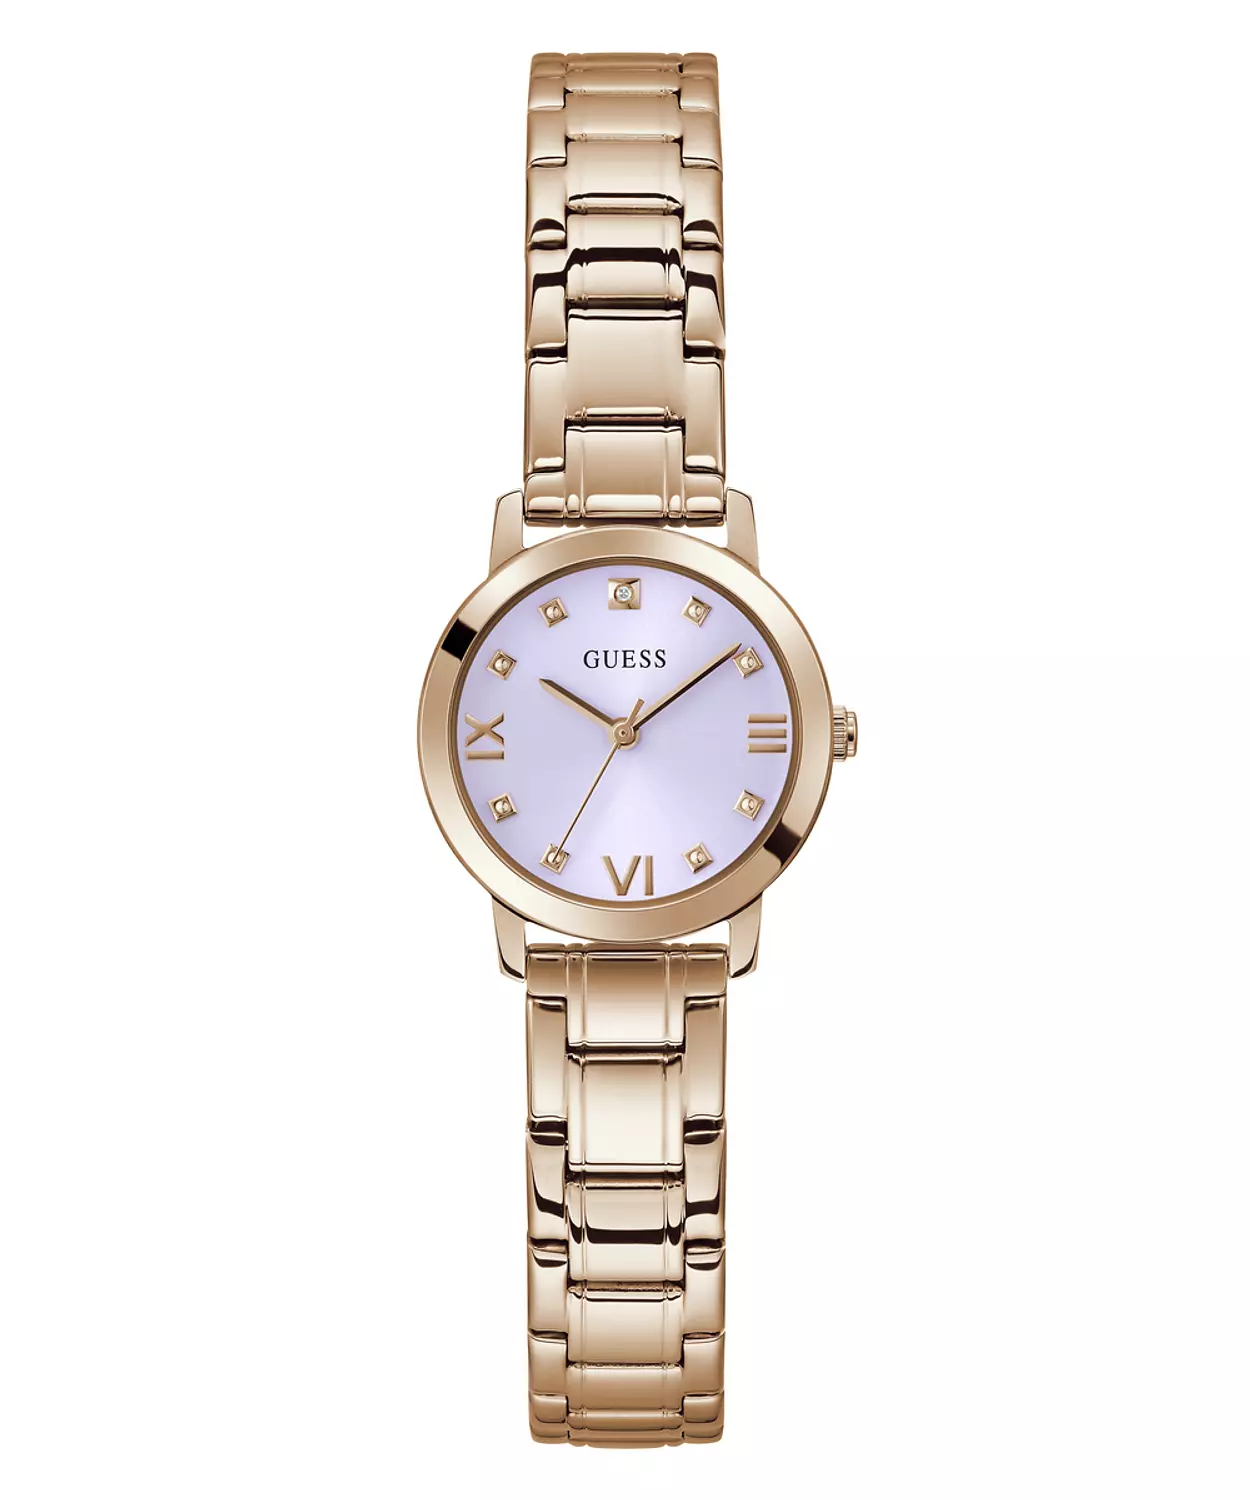 GUESS GW0532L3 ANALOG WATCH For Women Round Shape Rose Gold Stainless Steel Polished Bracelet hover image